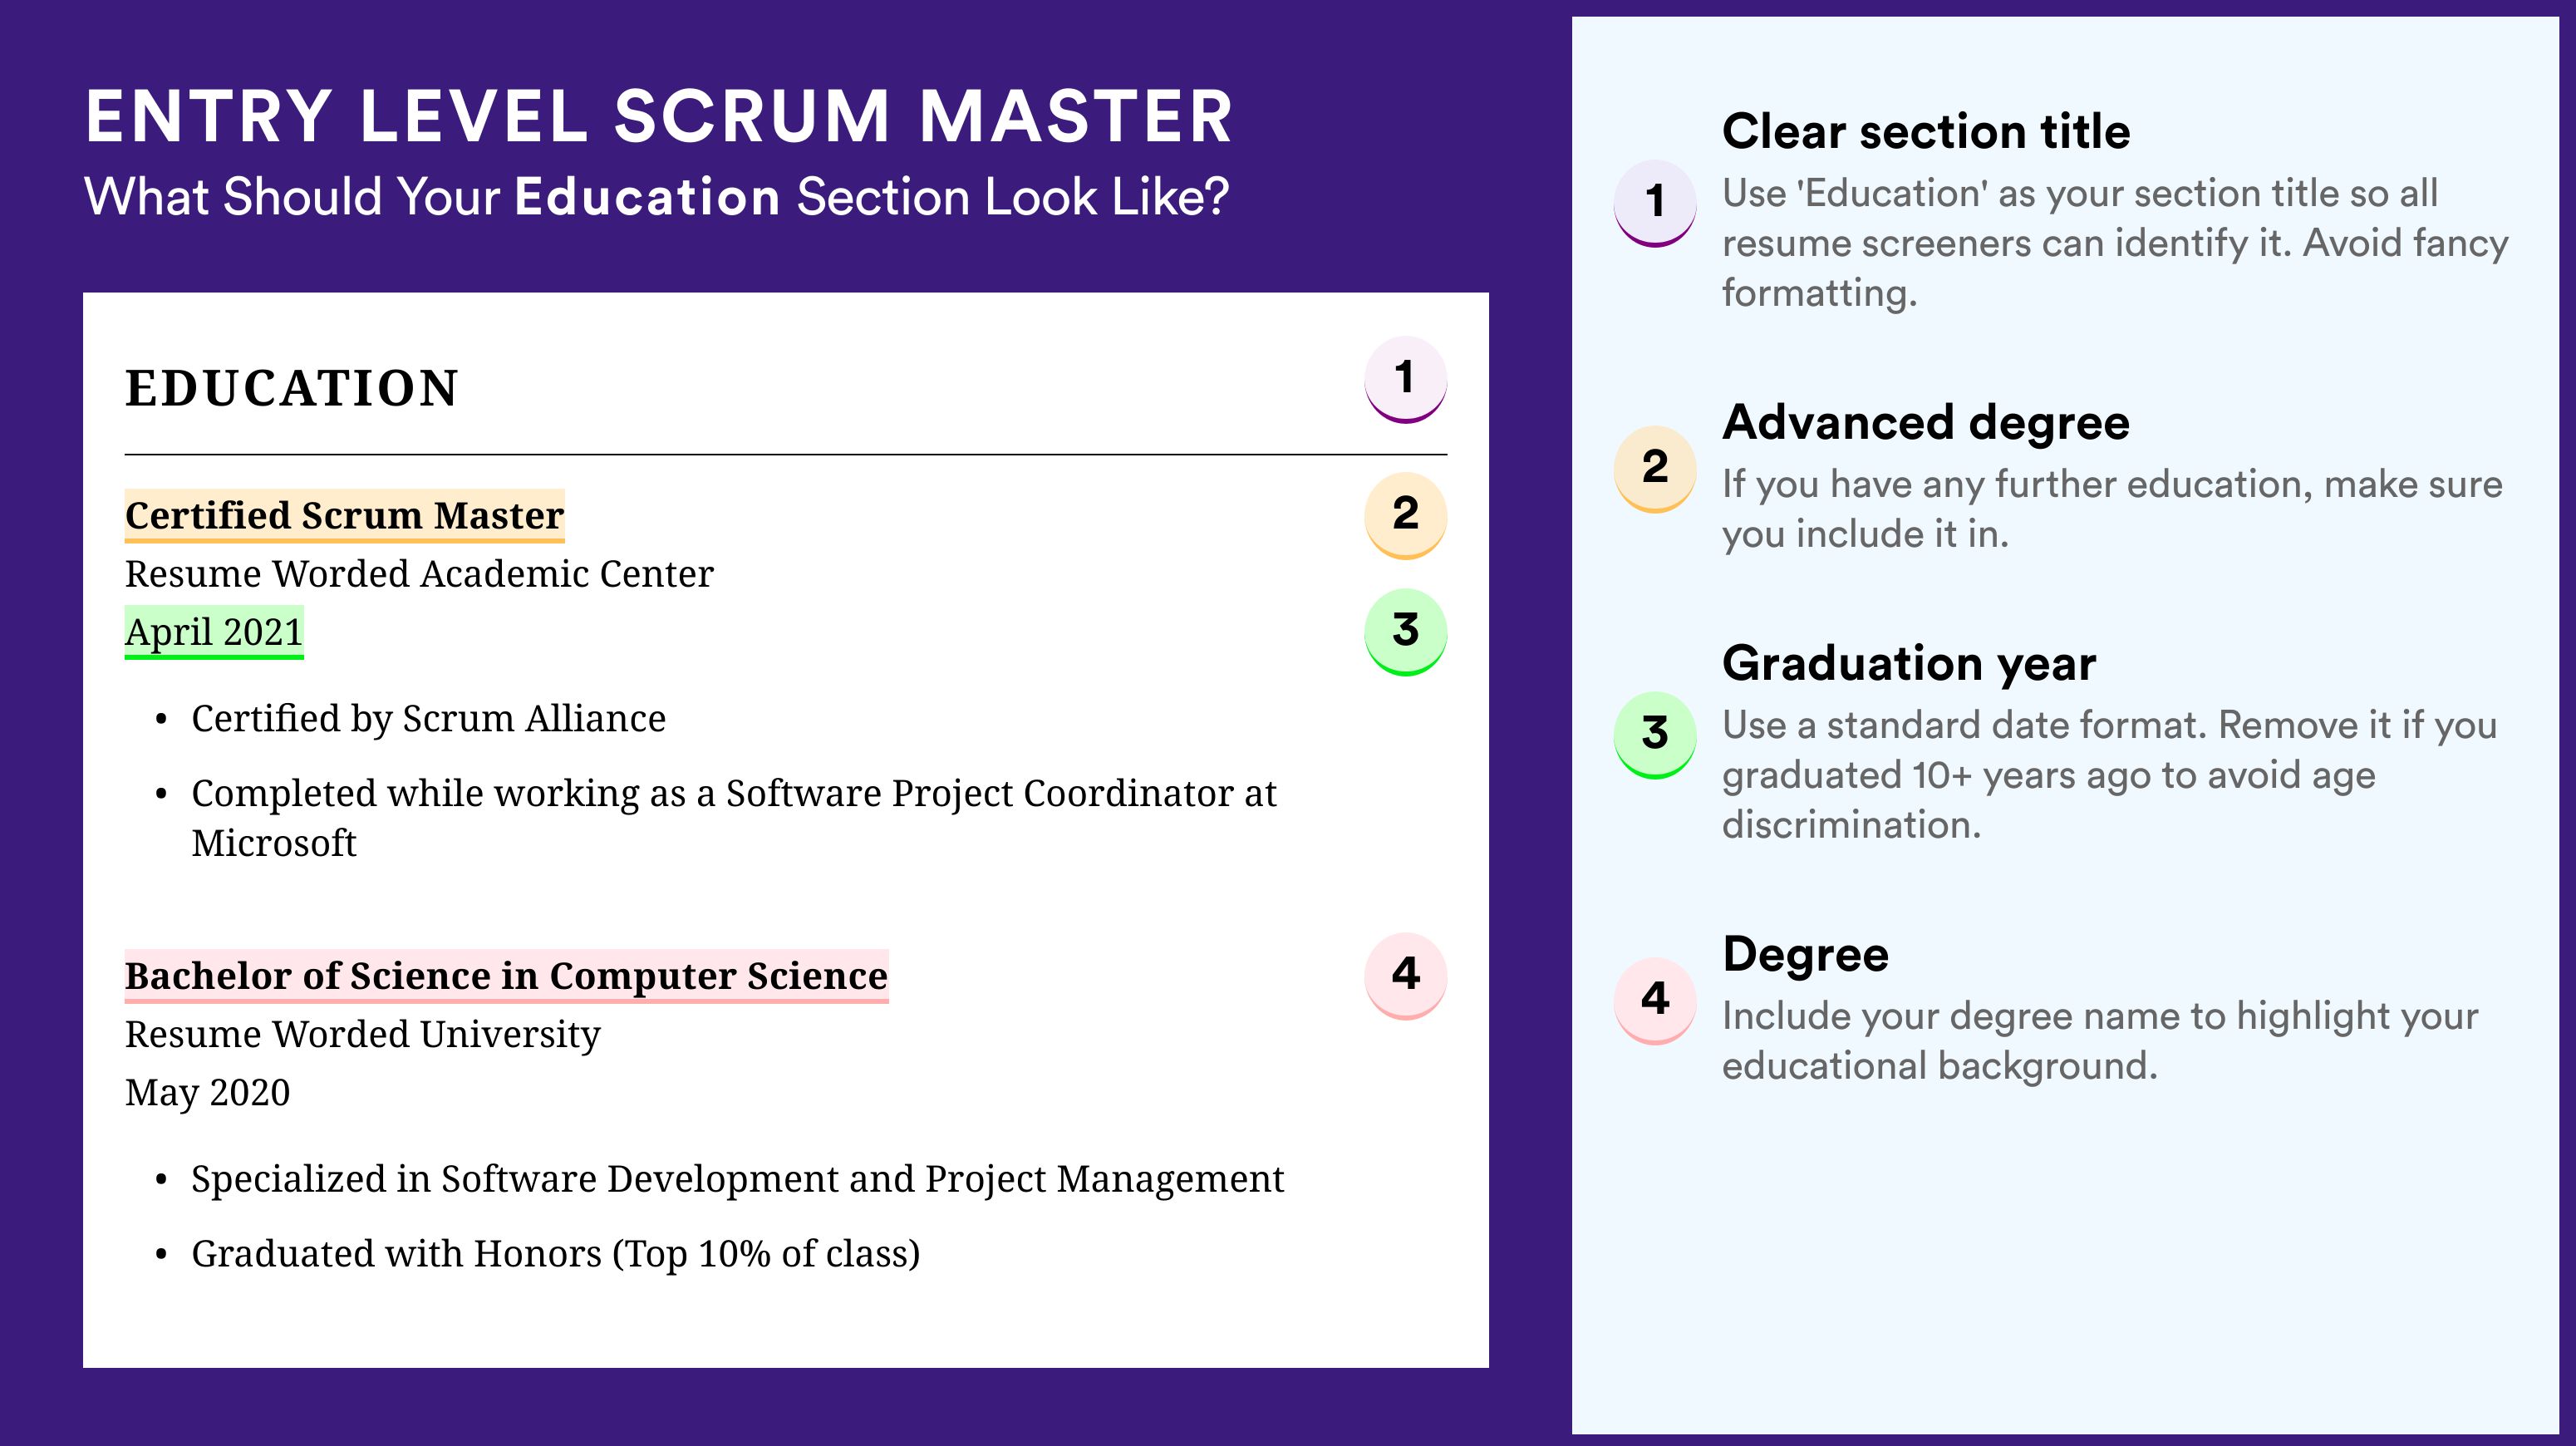 How To Write An Education Section - Entry Level Scrum Master Roles